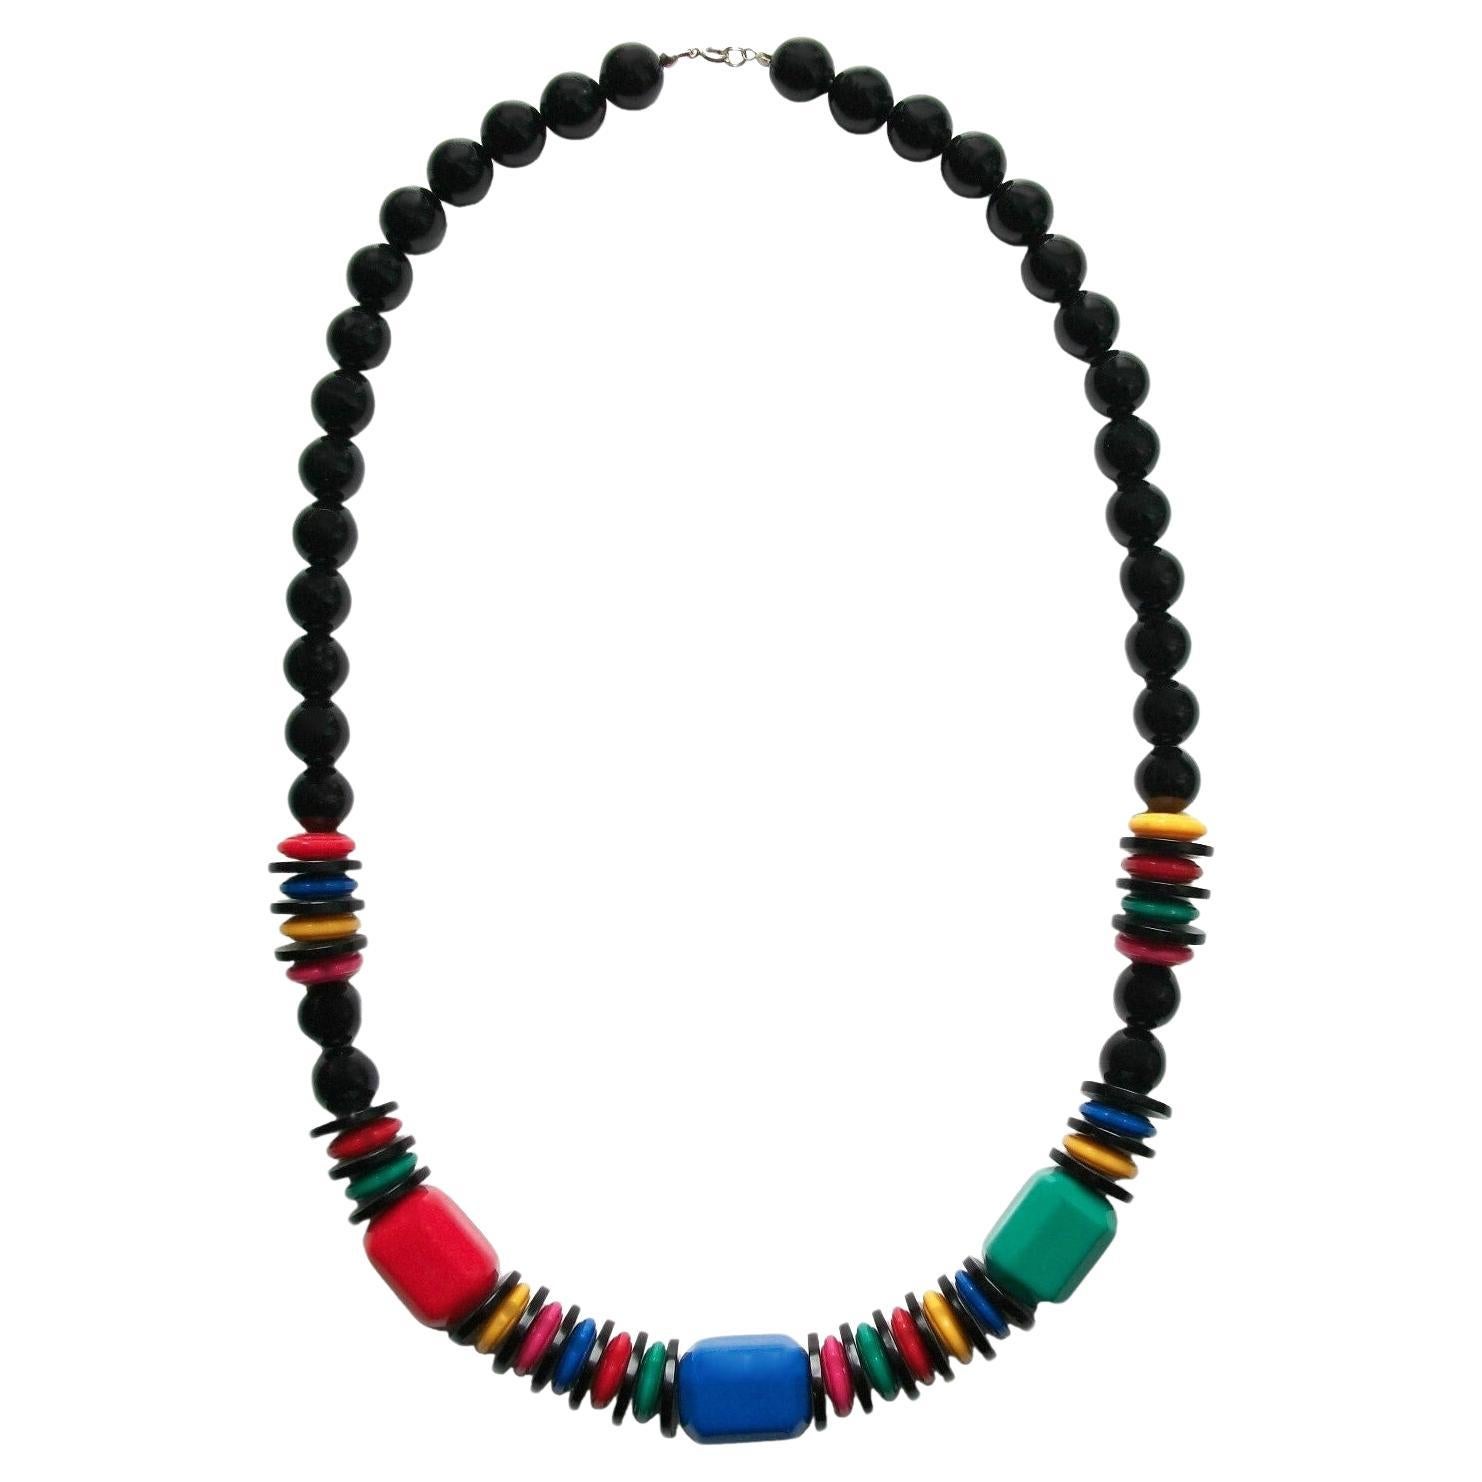 Vintage Multi-color & Black Acrylic Bead Necklace - Unsigned - Circa 1980's For Sale